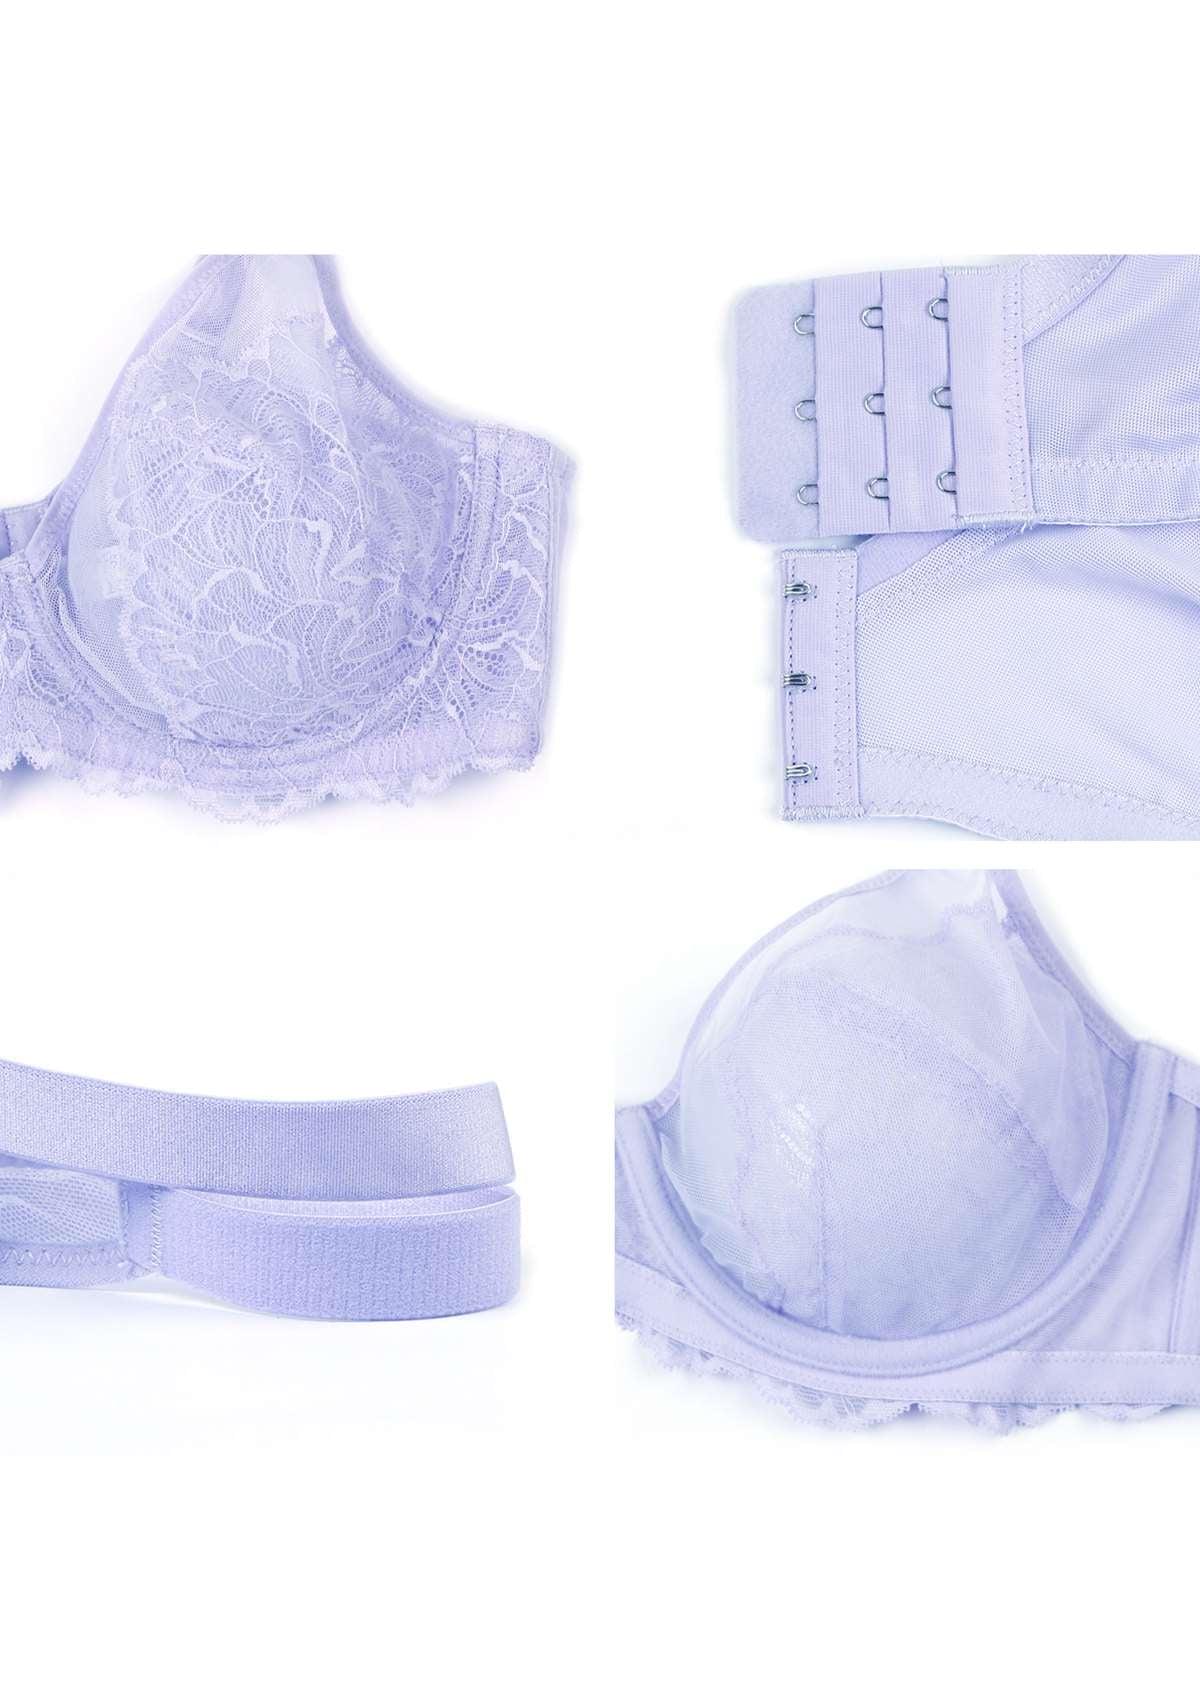 HSIA Blossom Transparent Lace Bra: Plus Size Wired Back Smoothing Bra - Light Purple / 40 / C